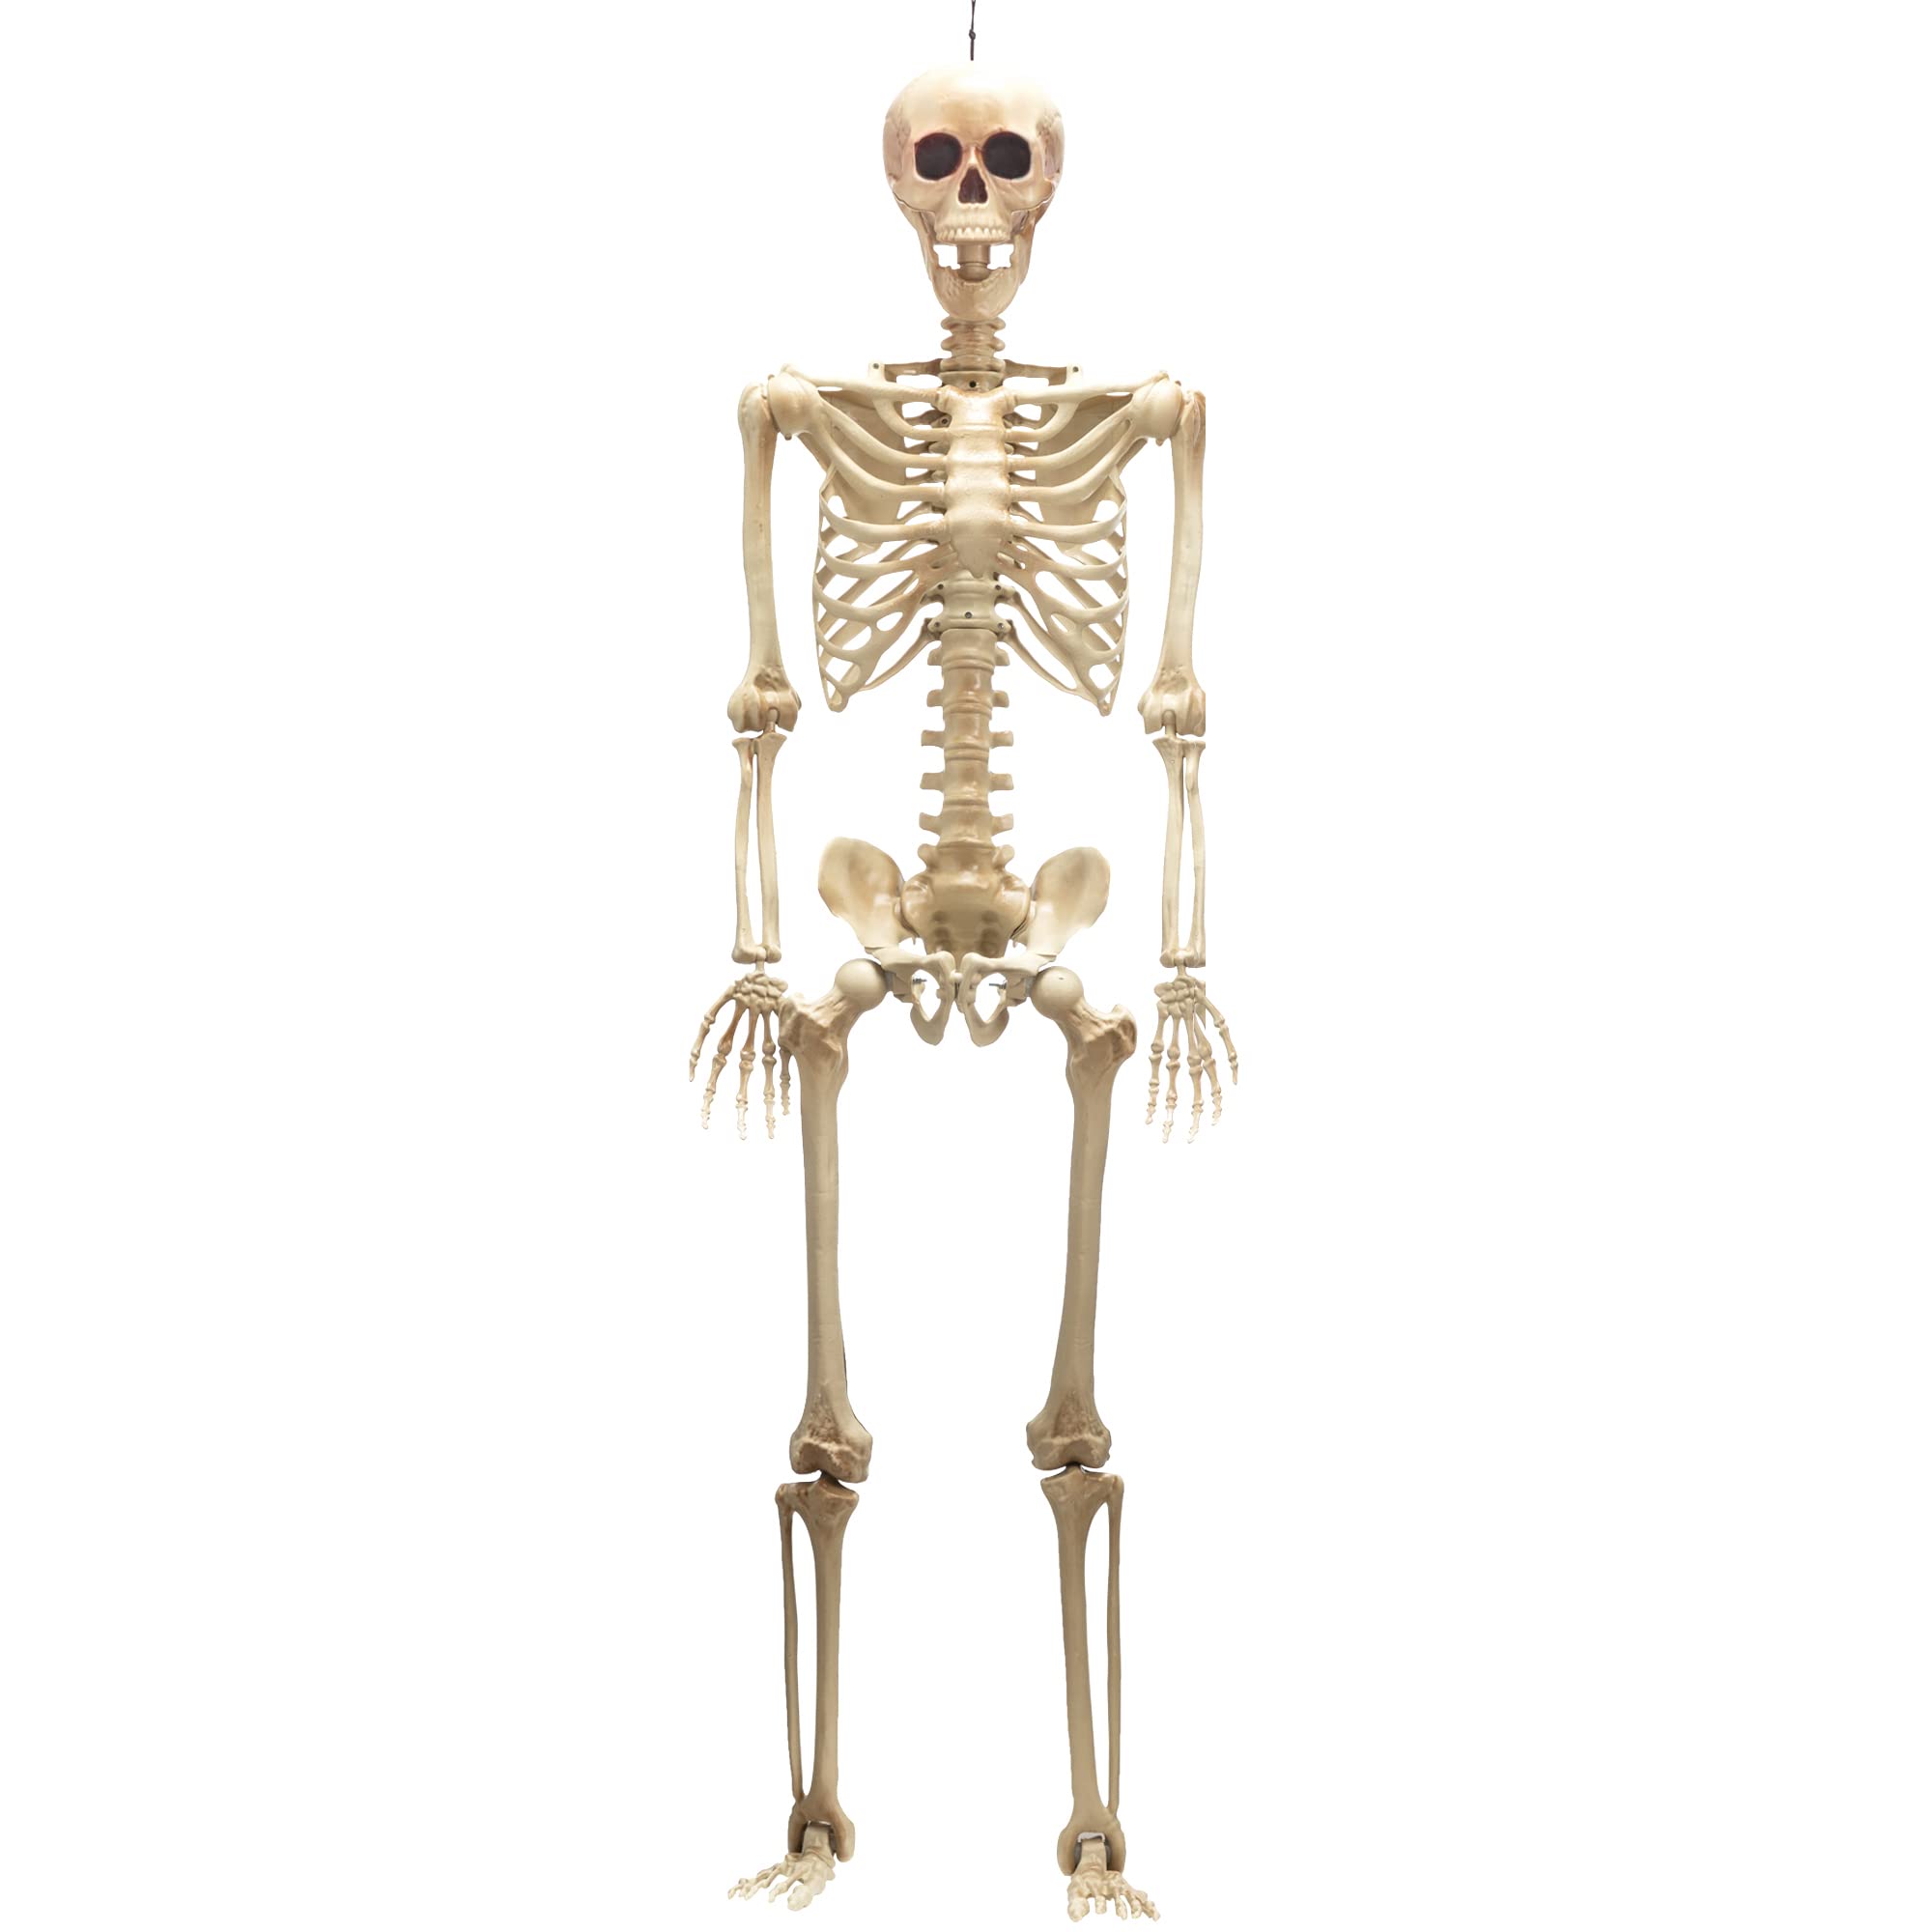 JOYIN 5 ft Halloween Life-Size Skeleton with Red Light Eyes, Full Body Human Bones with Posable Joint for Halloween Decorations, Haunted House Accessories, Indoor/Outdoor Spooky Scene Party Favors